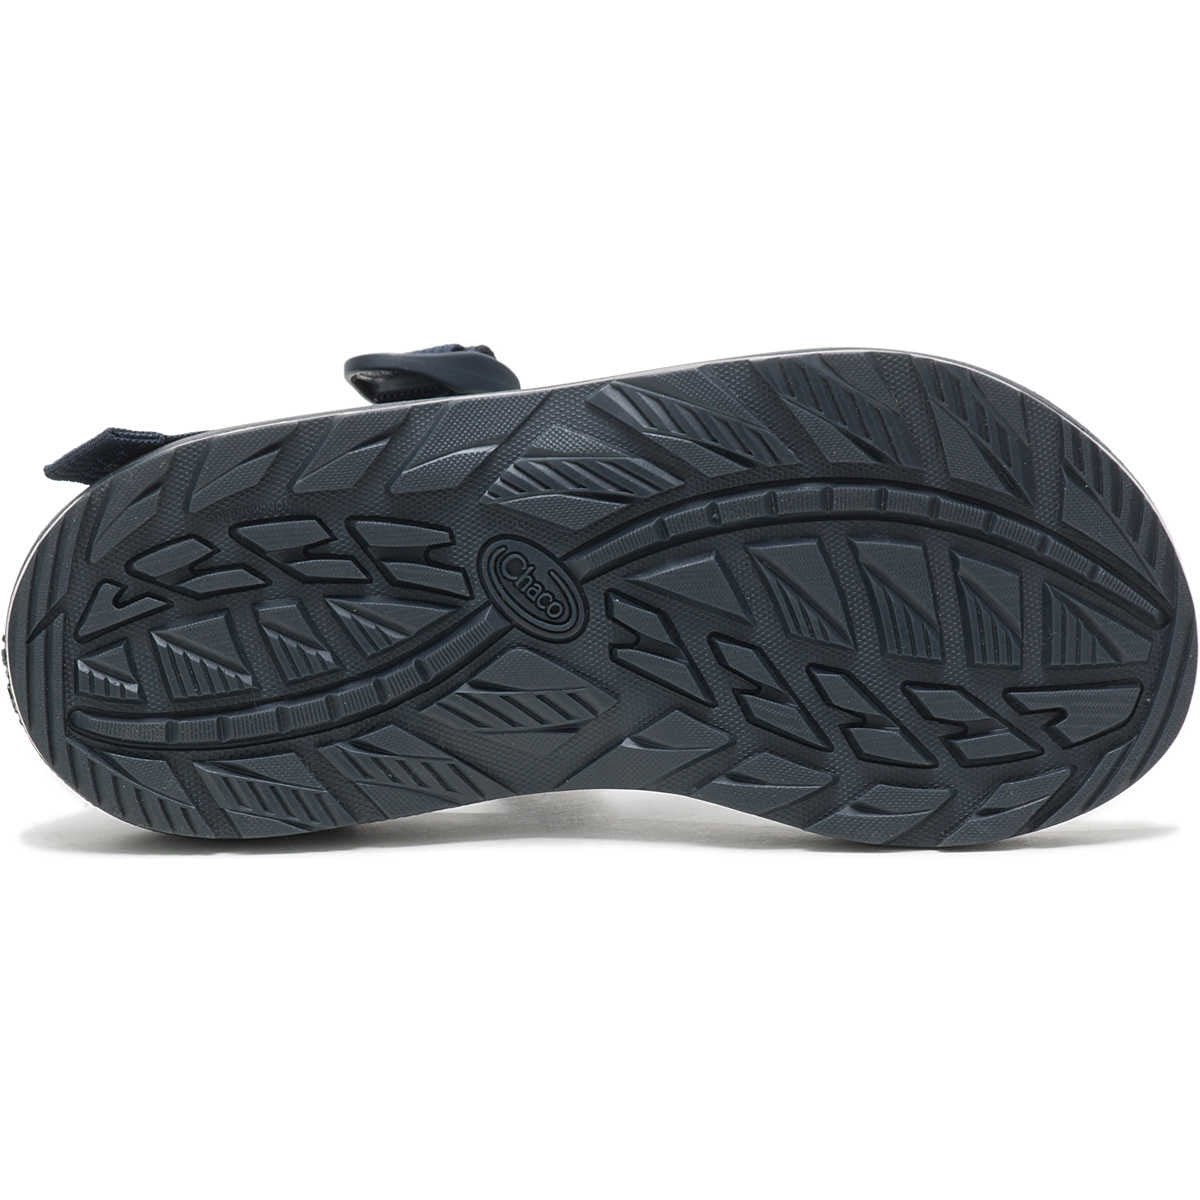 Bottom view of a black Chaco Z Cloud sandal showcasing its detailed tread pattern and ChacoGrip™ rubber outsole with an embedded brand logo.